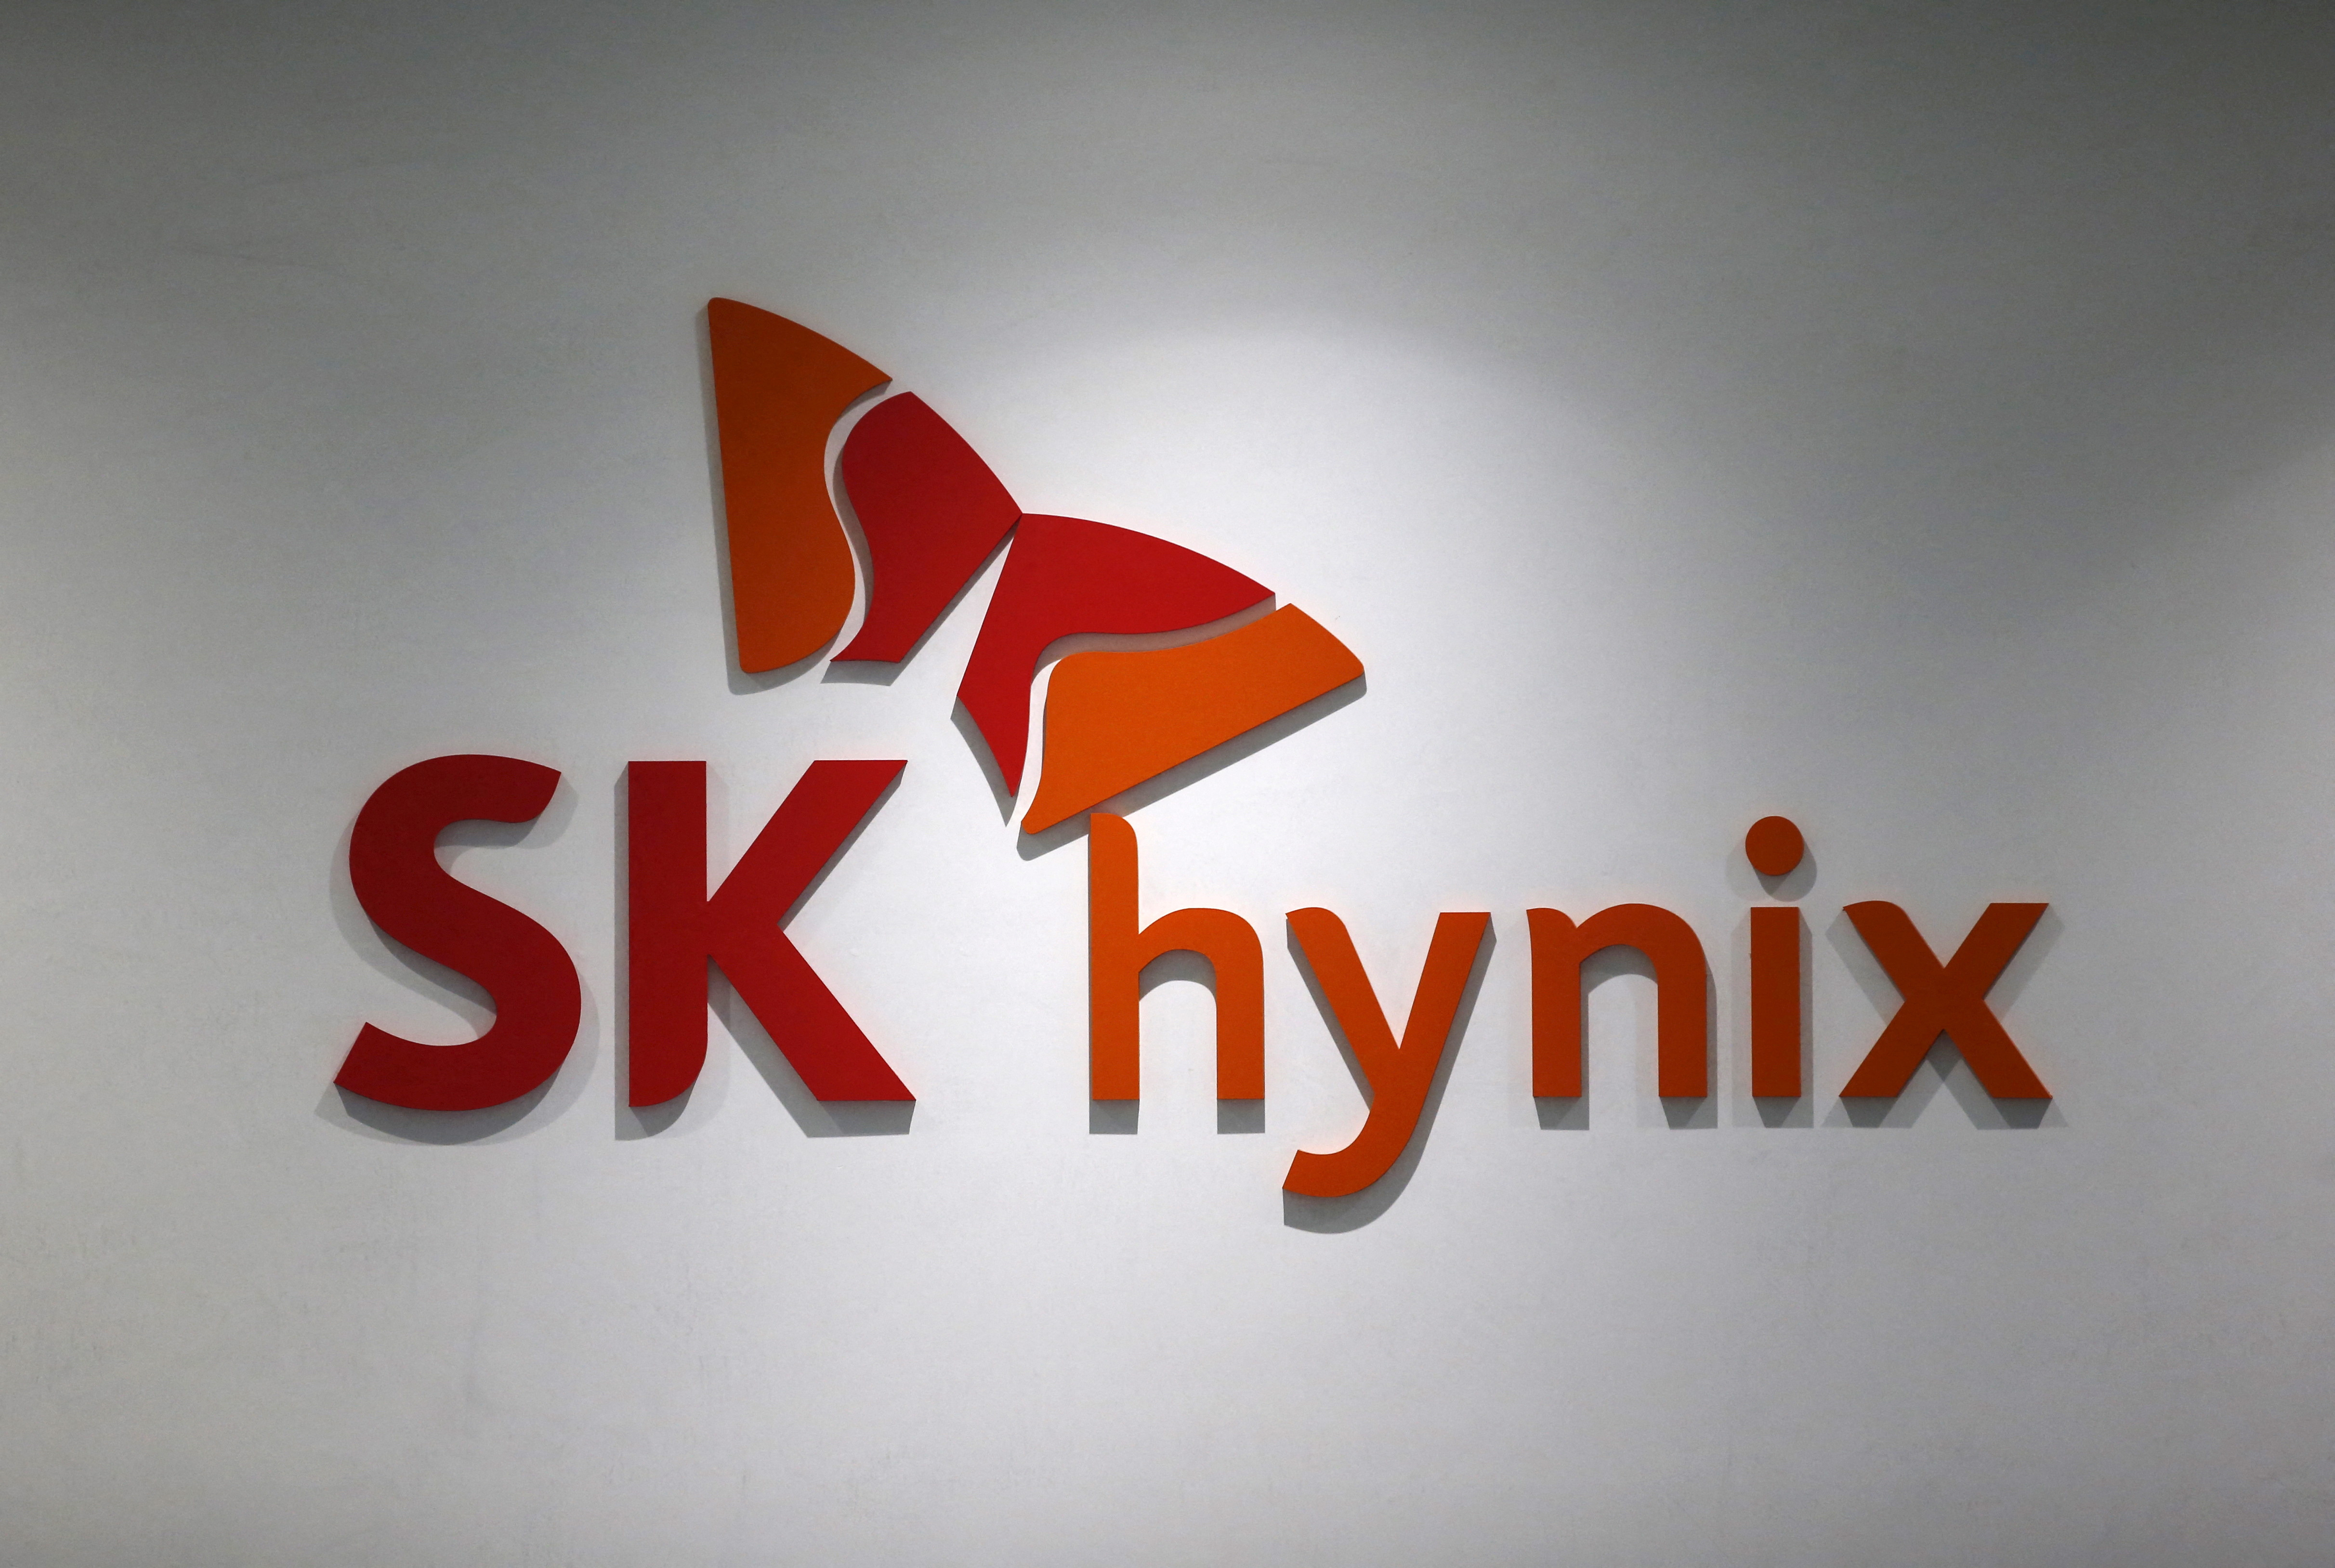 The logo of SK Hynix is seen at its headquarters in Seongnam